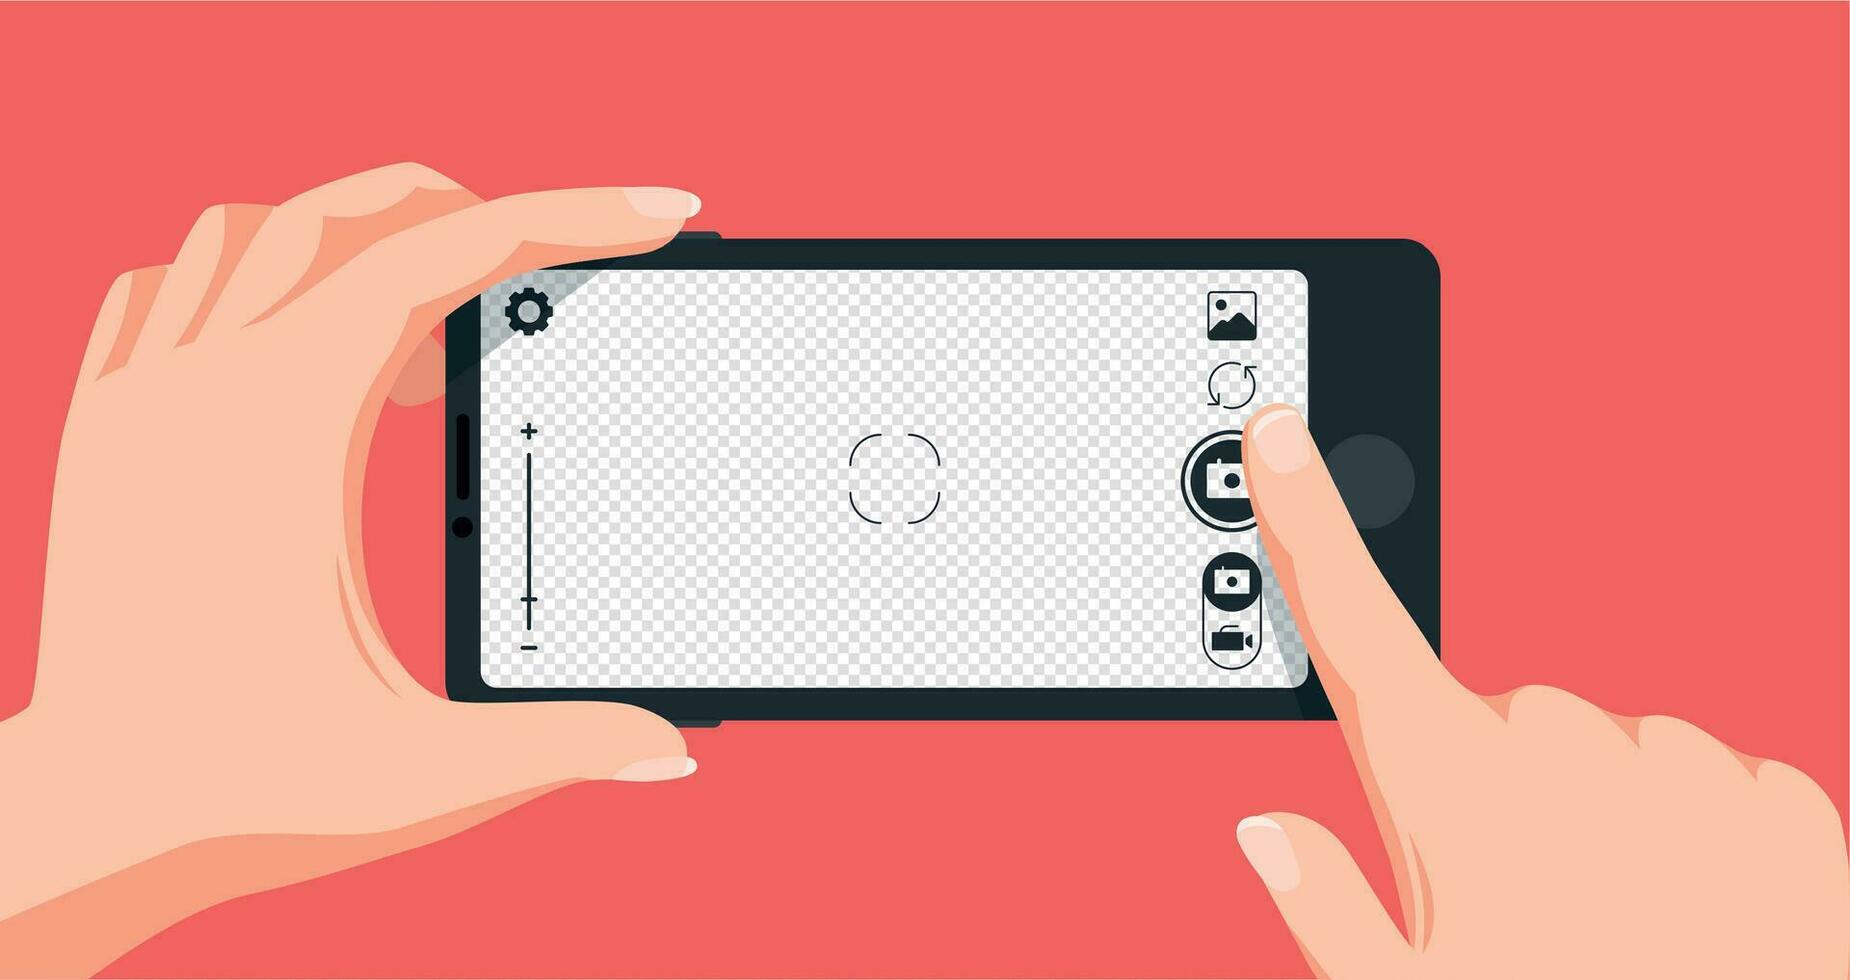 Taking photo with smartphone. Finger touching mobile phone screen to make picture. Pressing camera button. vector